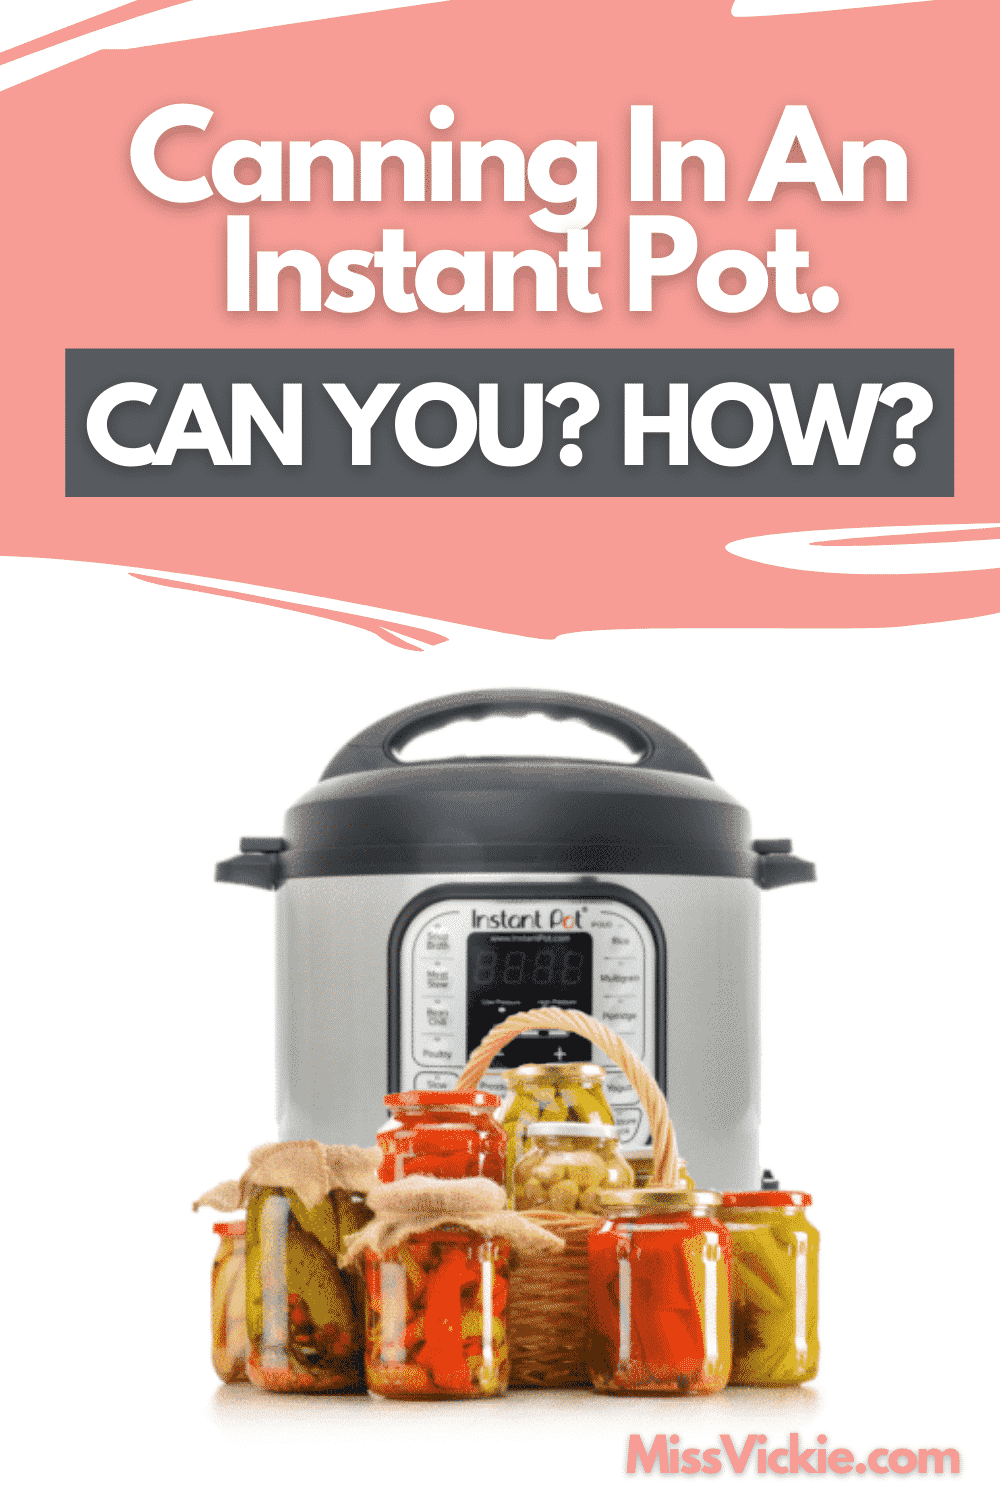 Canning In An Instant Pot